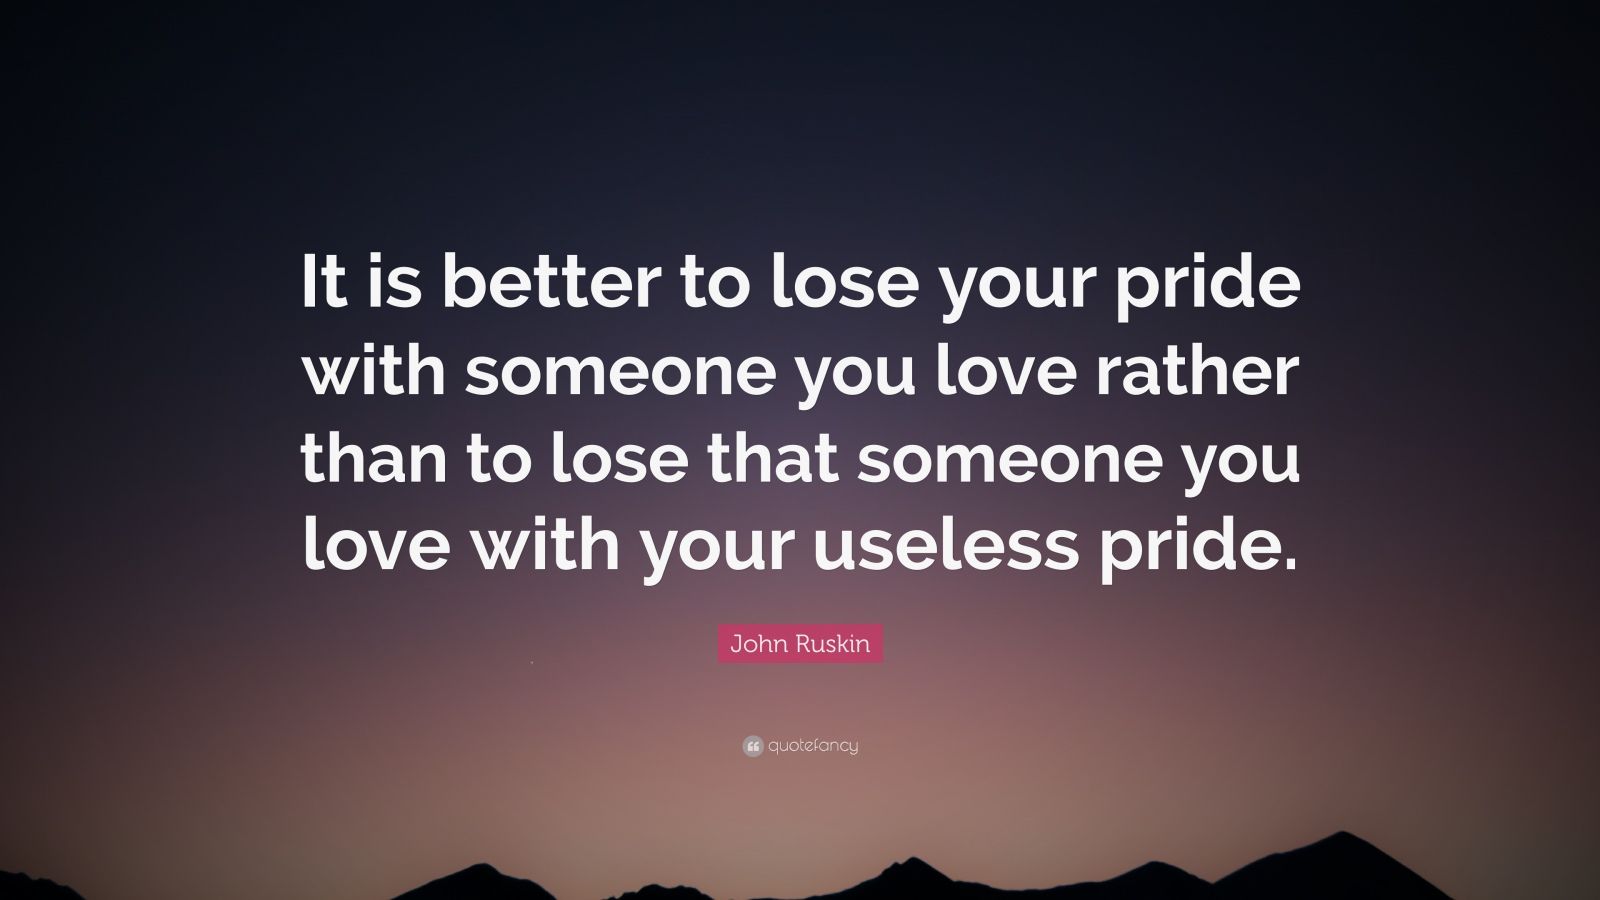 John Ruskin Quote: “It is better to lose your pride with someone you